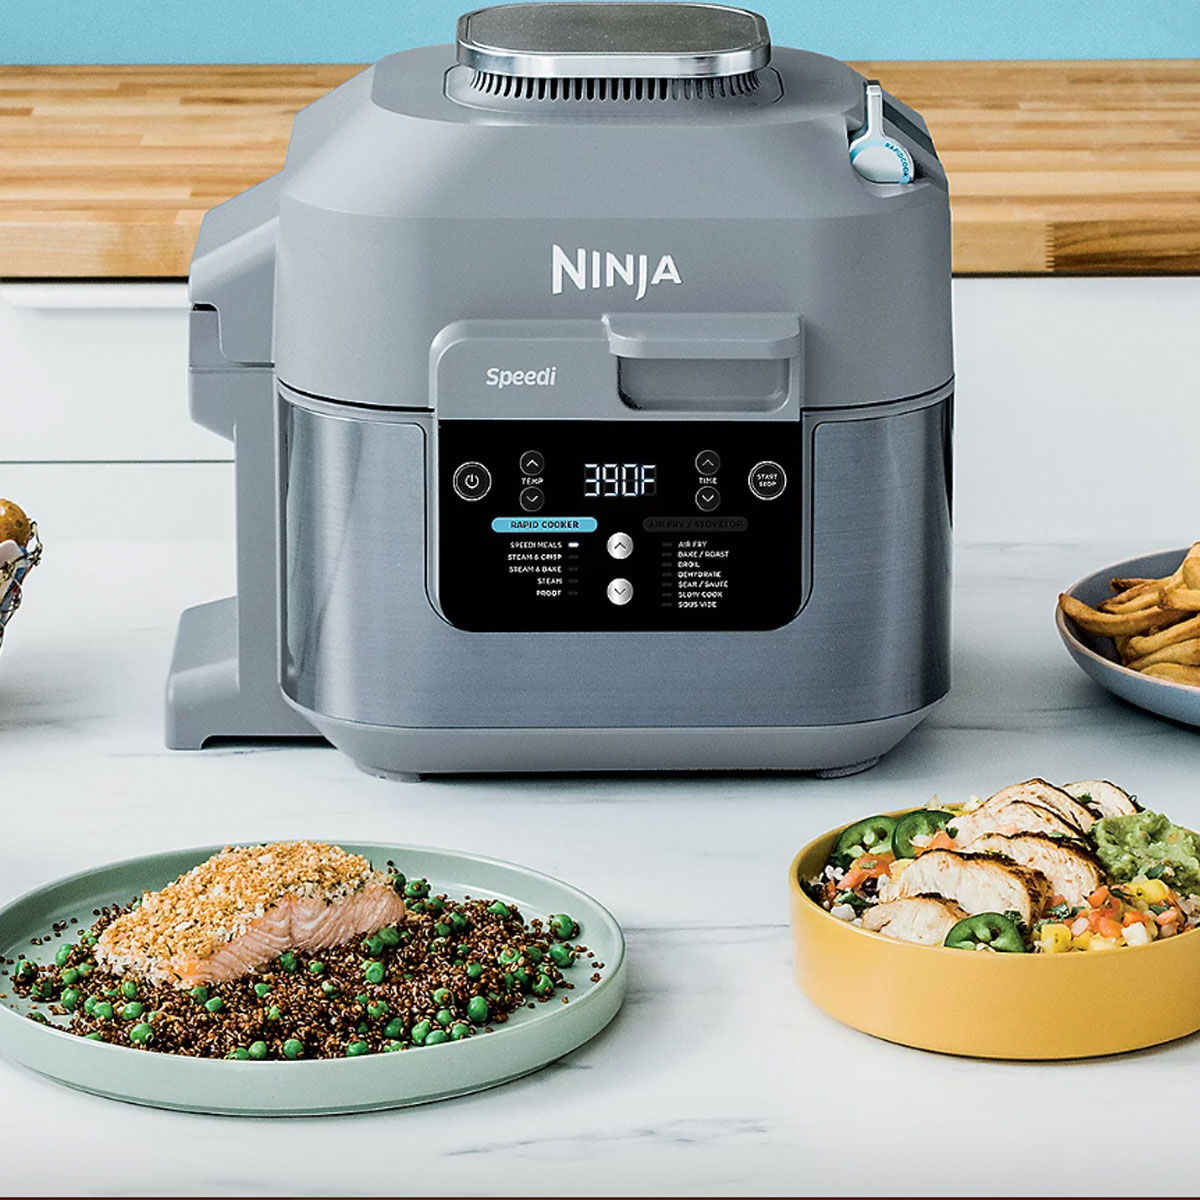 Cook with me and the Ninja Speedi @NinjaKitchen! Check out